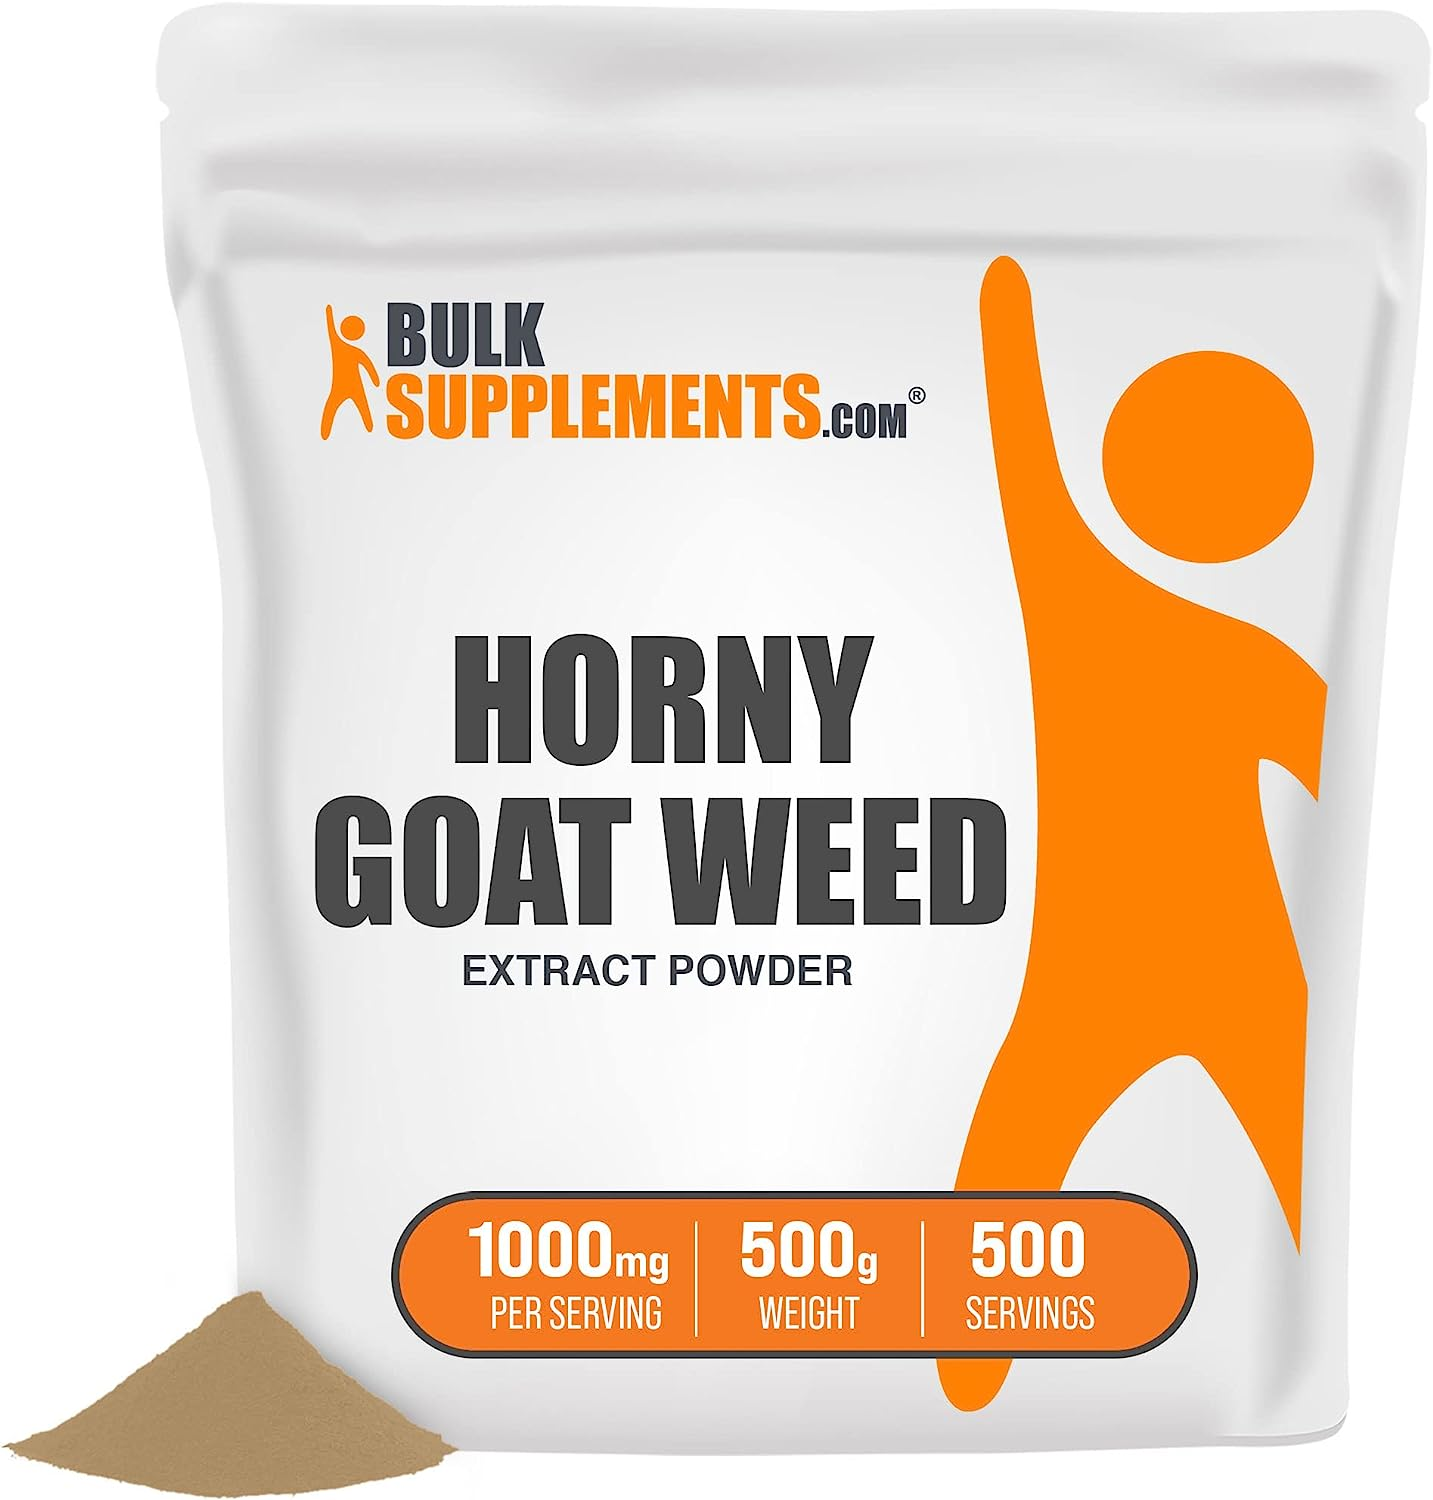 Bulk Supplements  Horny Goat Weed Extract Powder 500 Grams Bag